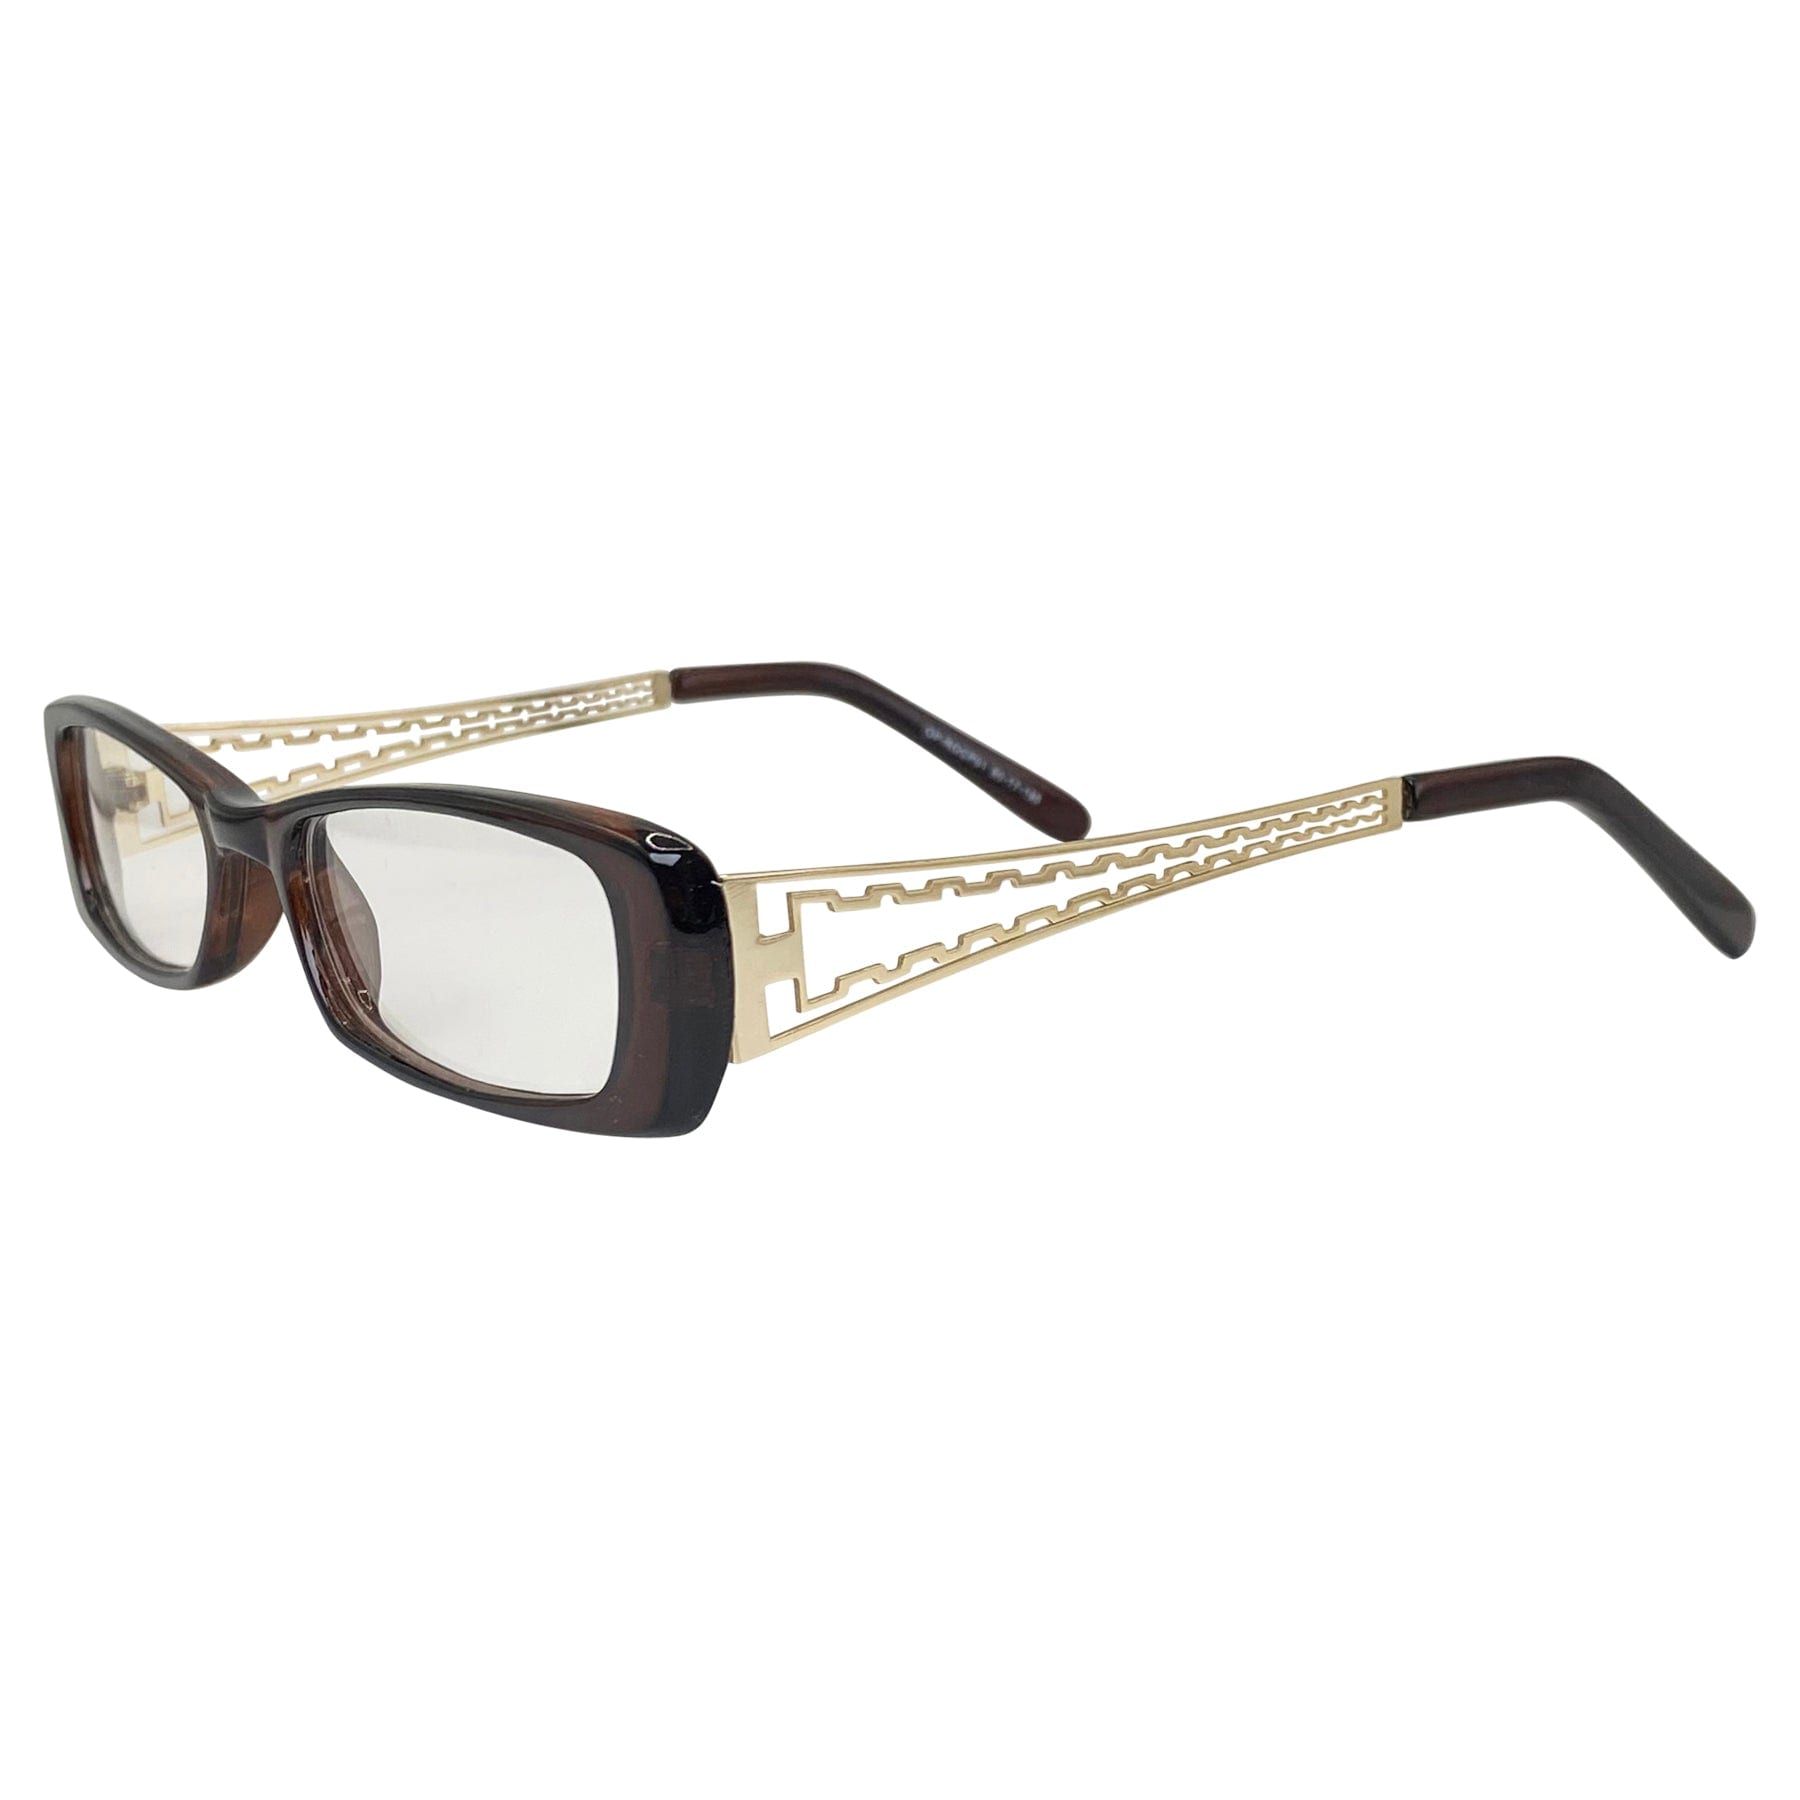 90s style retro glasses with a small rectangular shape 